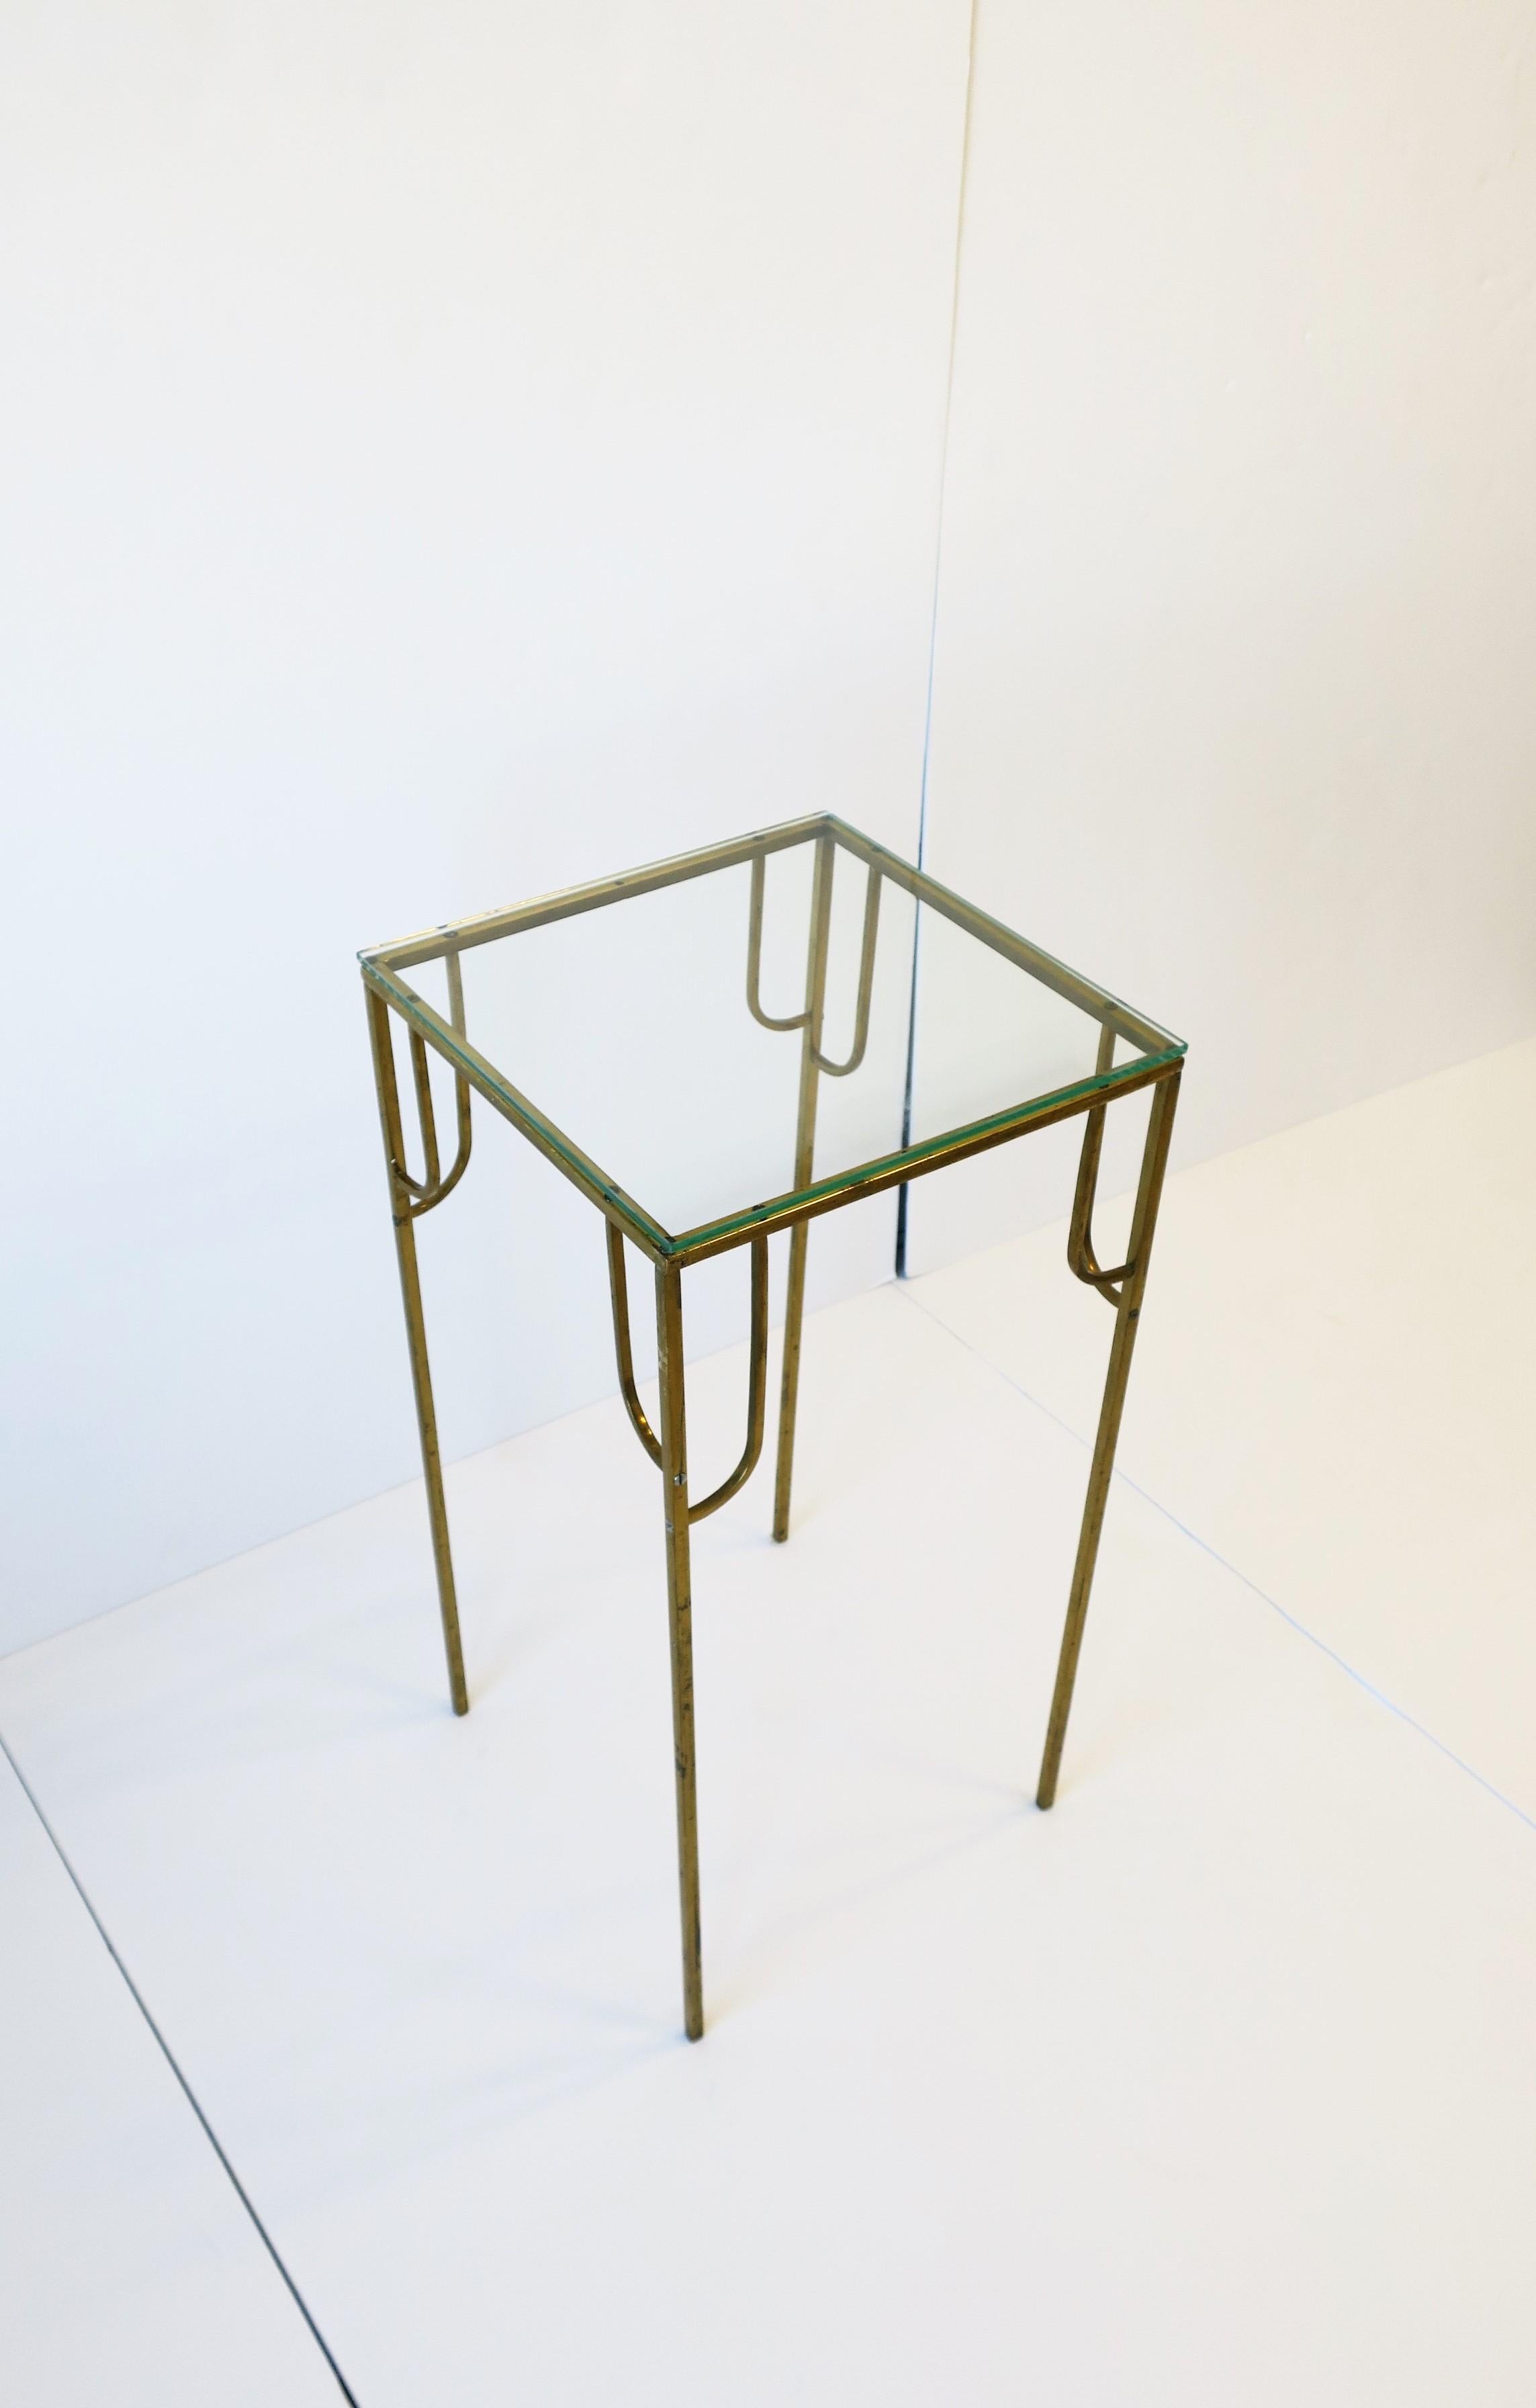 Late 20th Century Brass and Glass Pedestal Column Table Modern Art Deco Style, circa 1970s